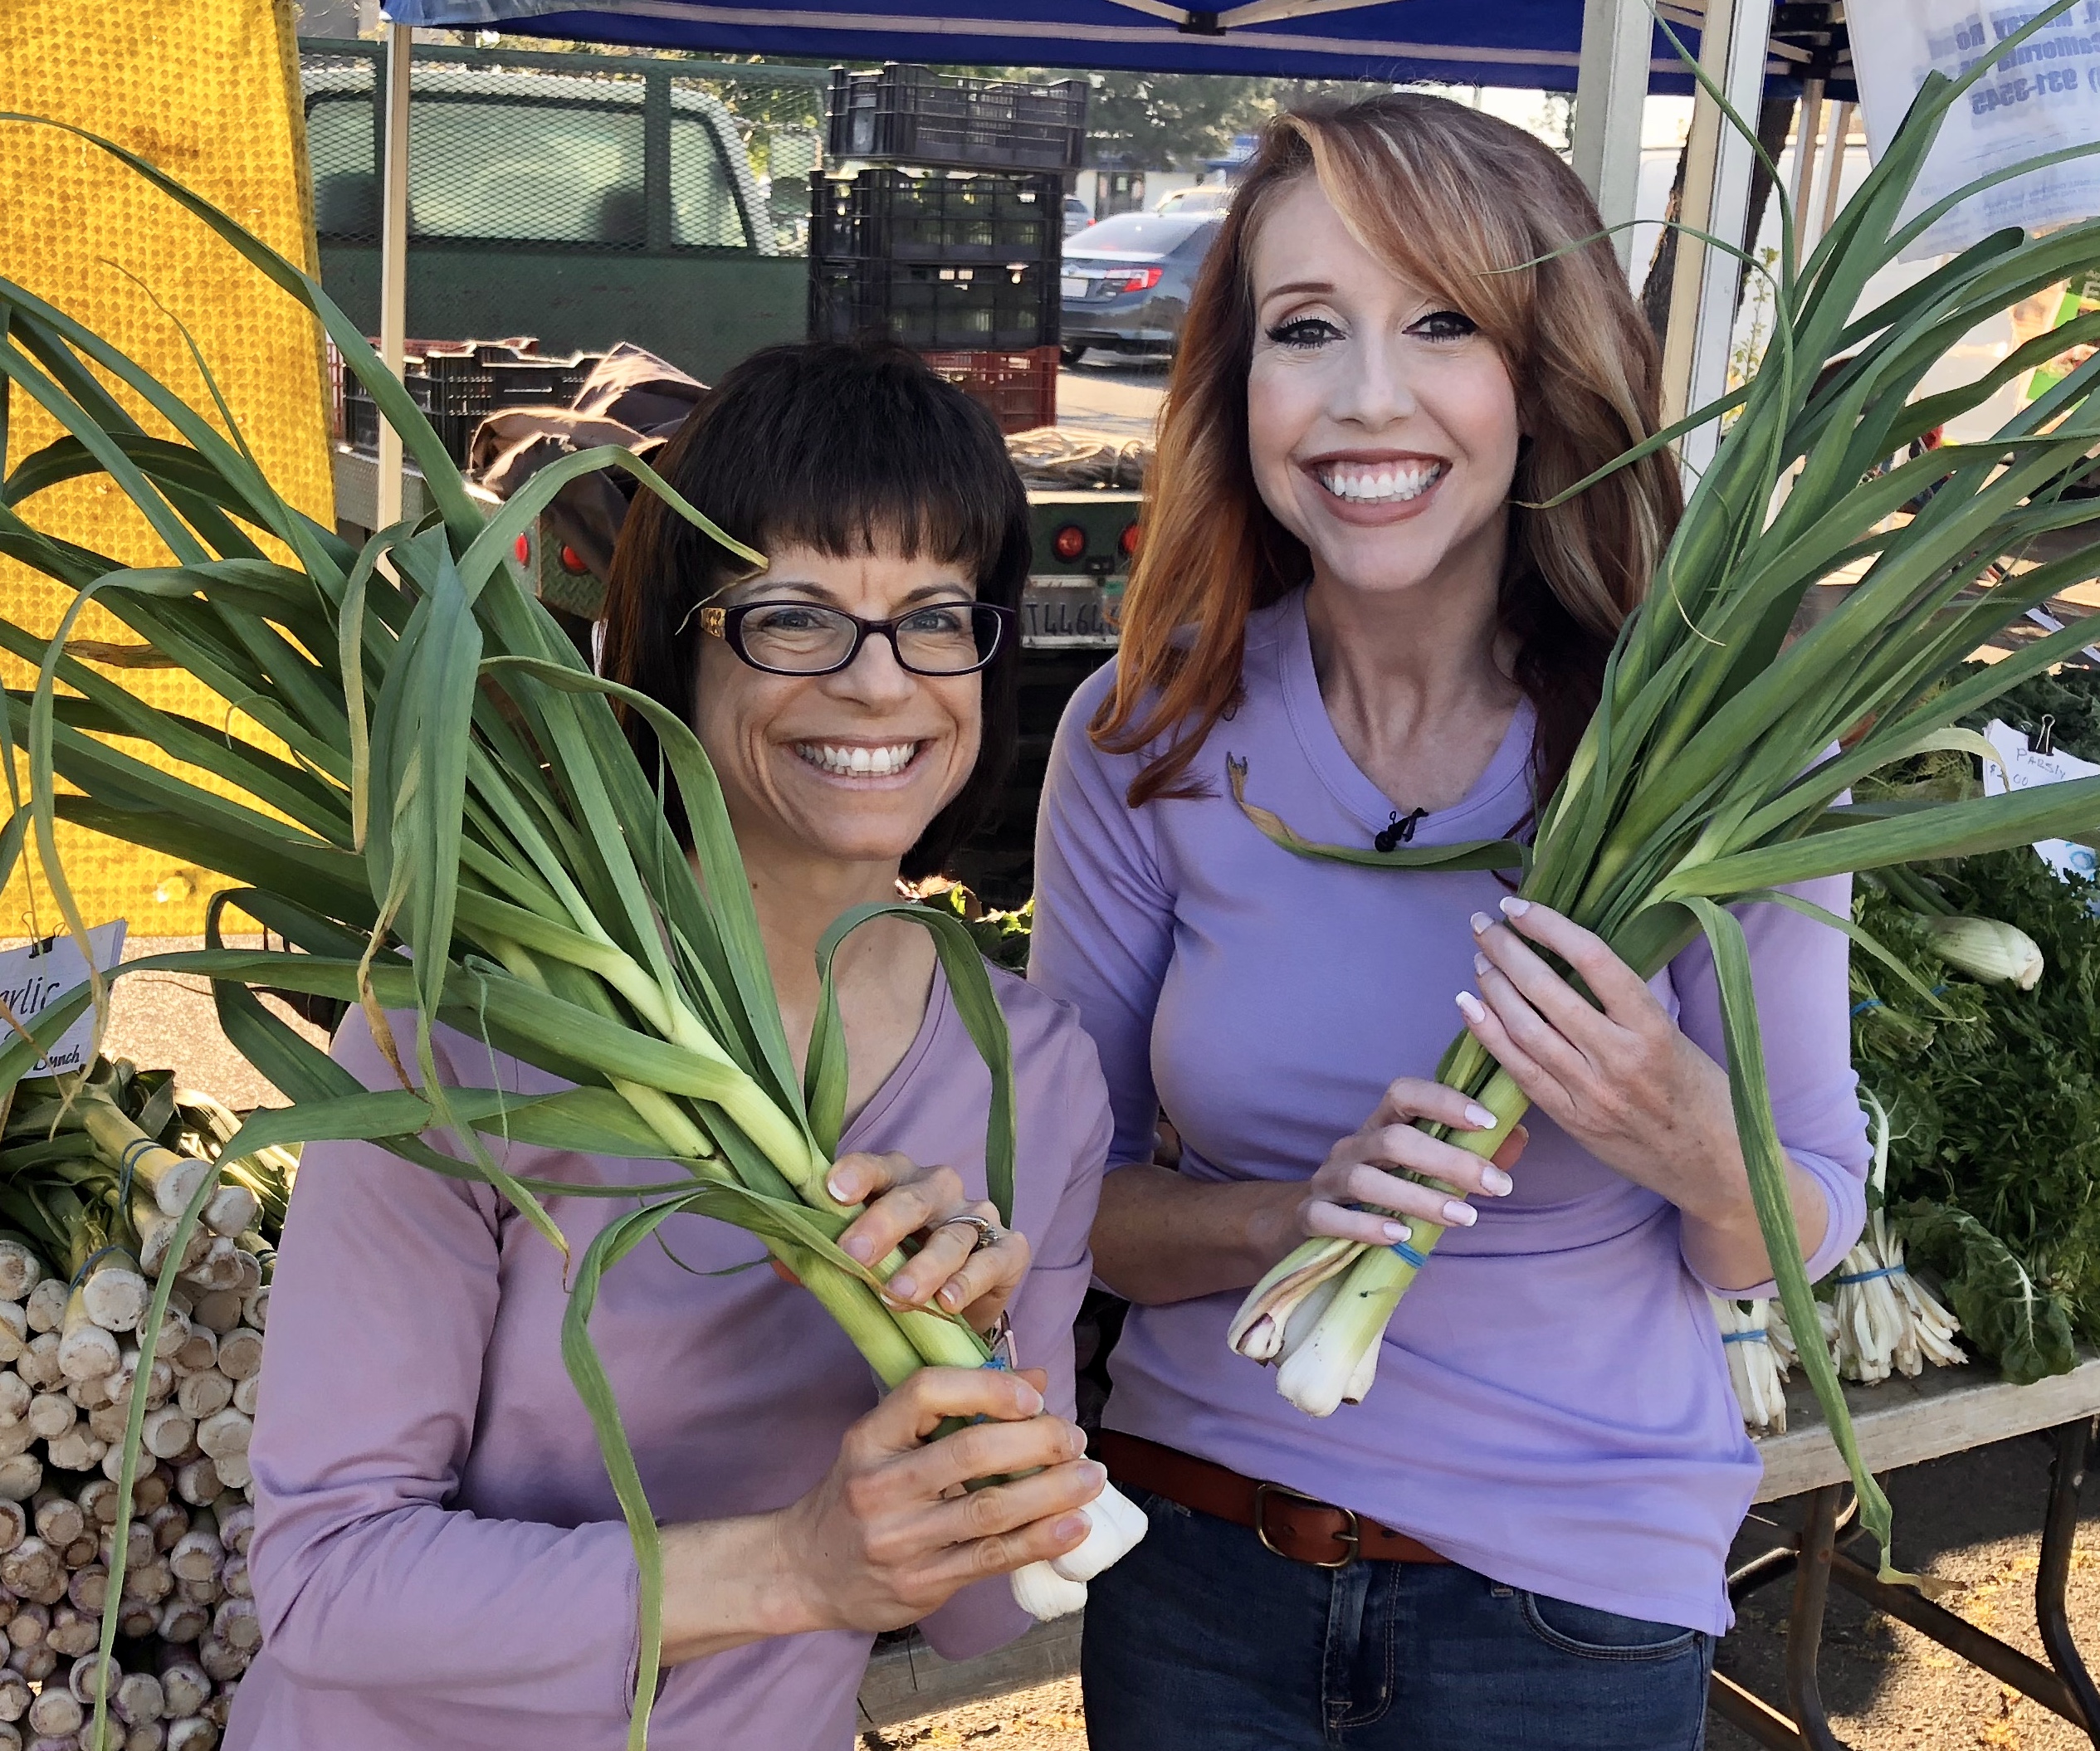 Cooking on California Bountiful TV: Look at that Gorgeous Green Garlic!!!